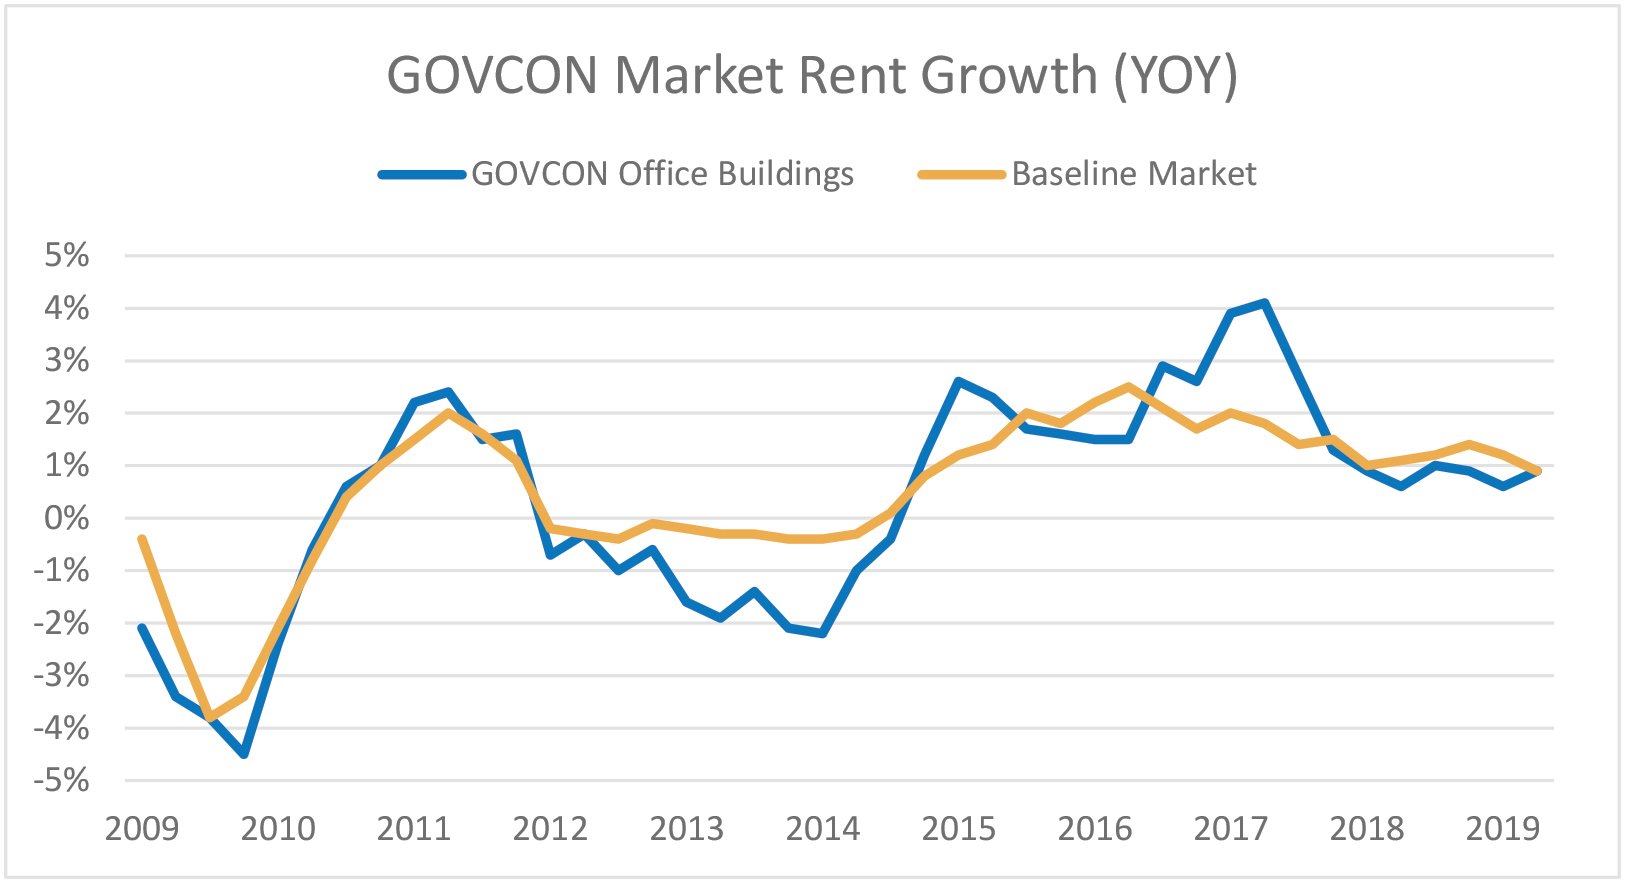 This graph represents the market rent growth year over year of our survey and is compared to the entire D.C. office market’s performance over the same time period.